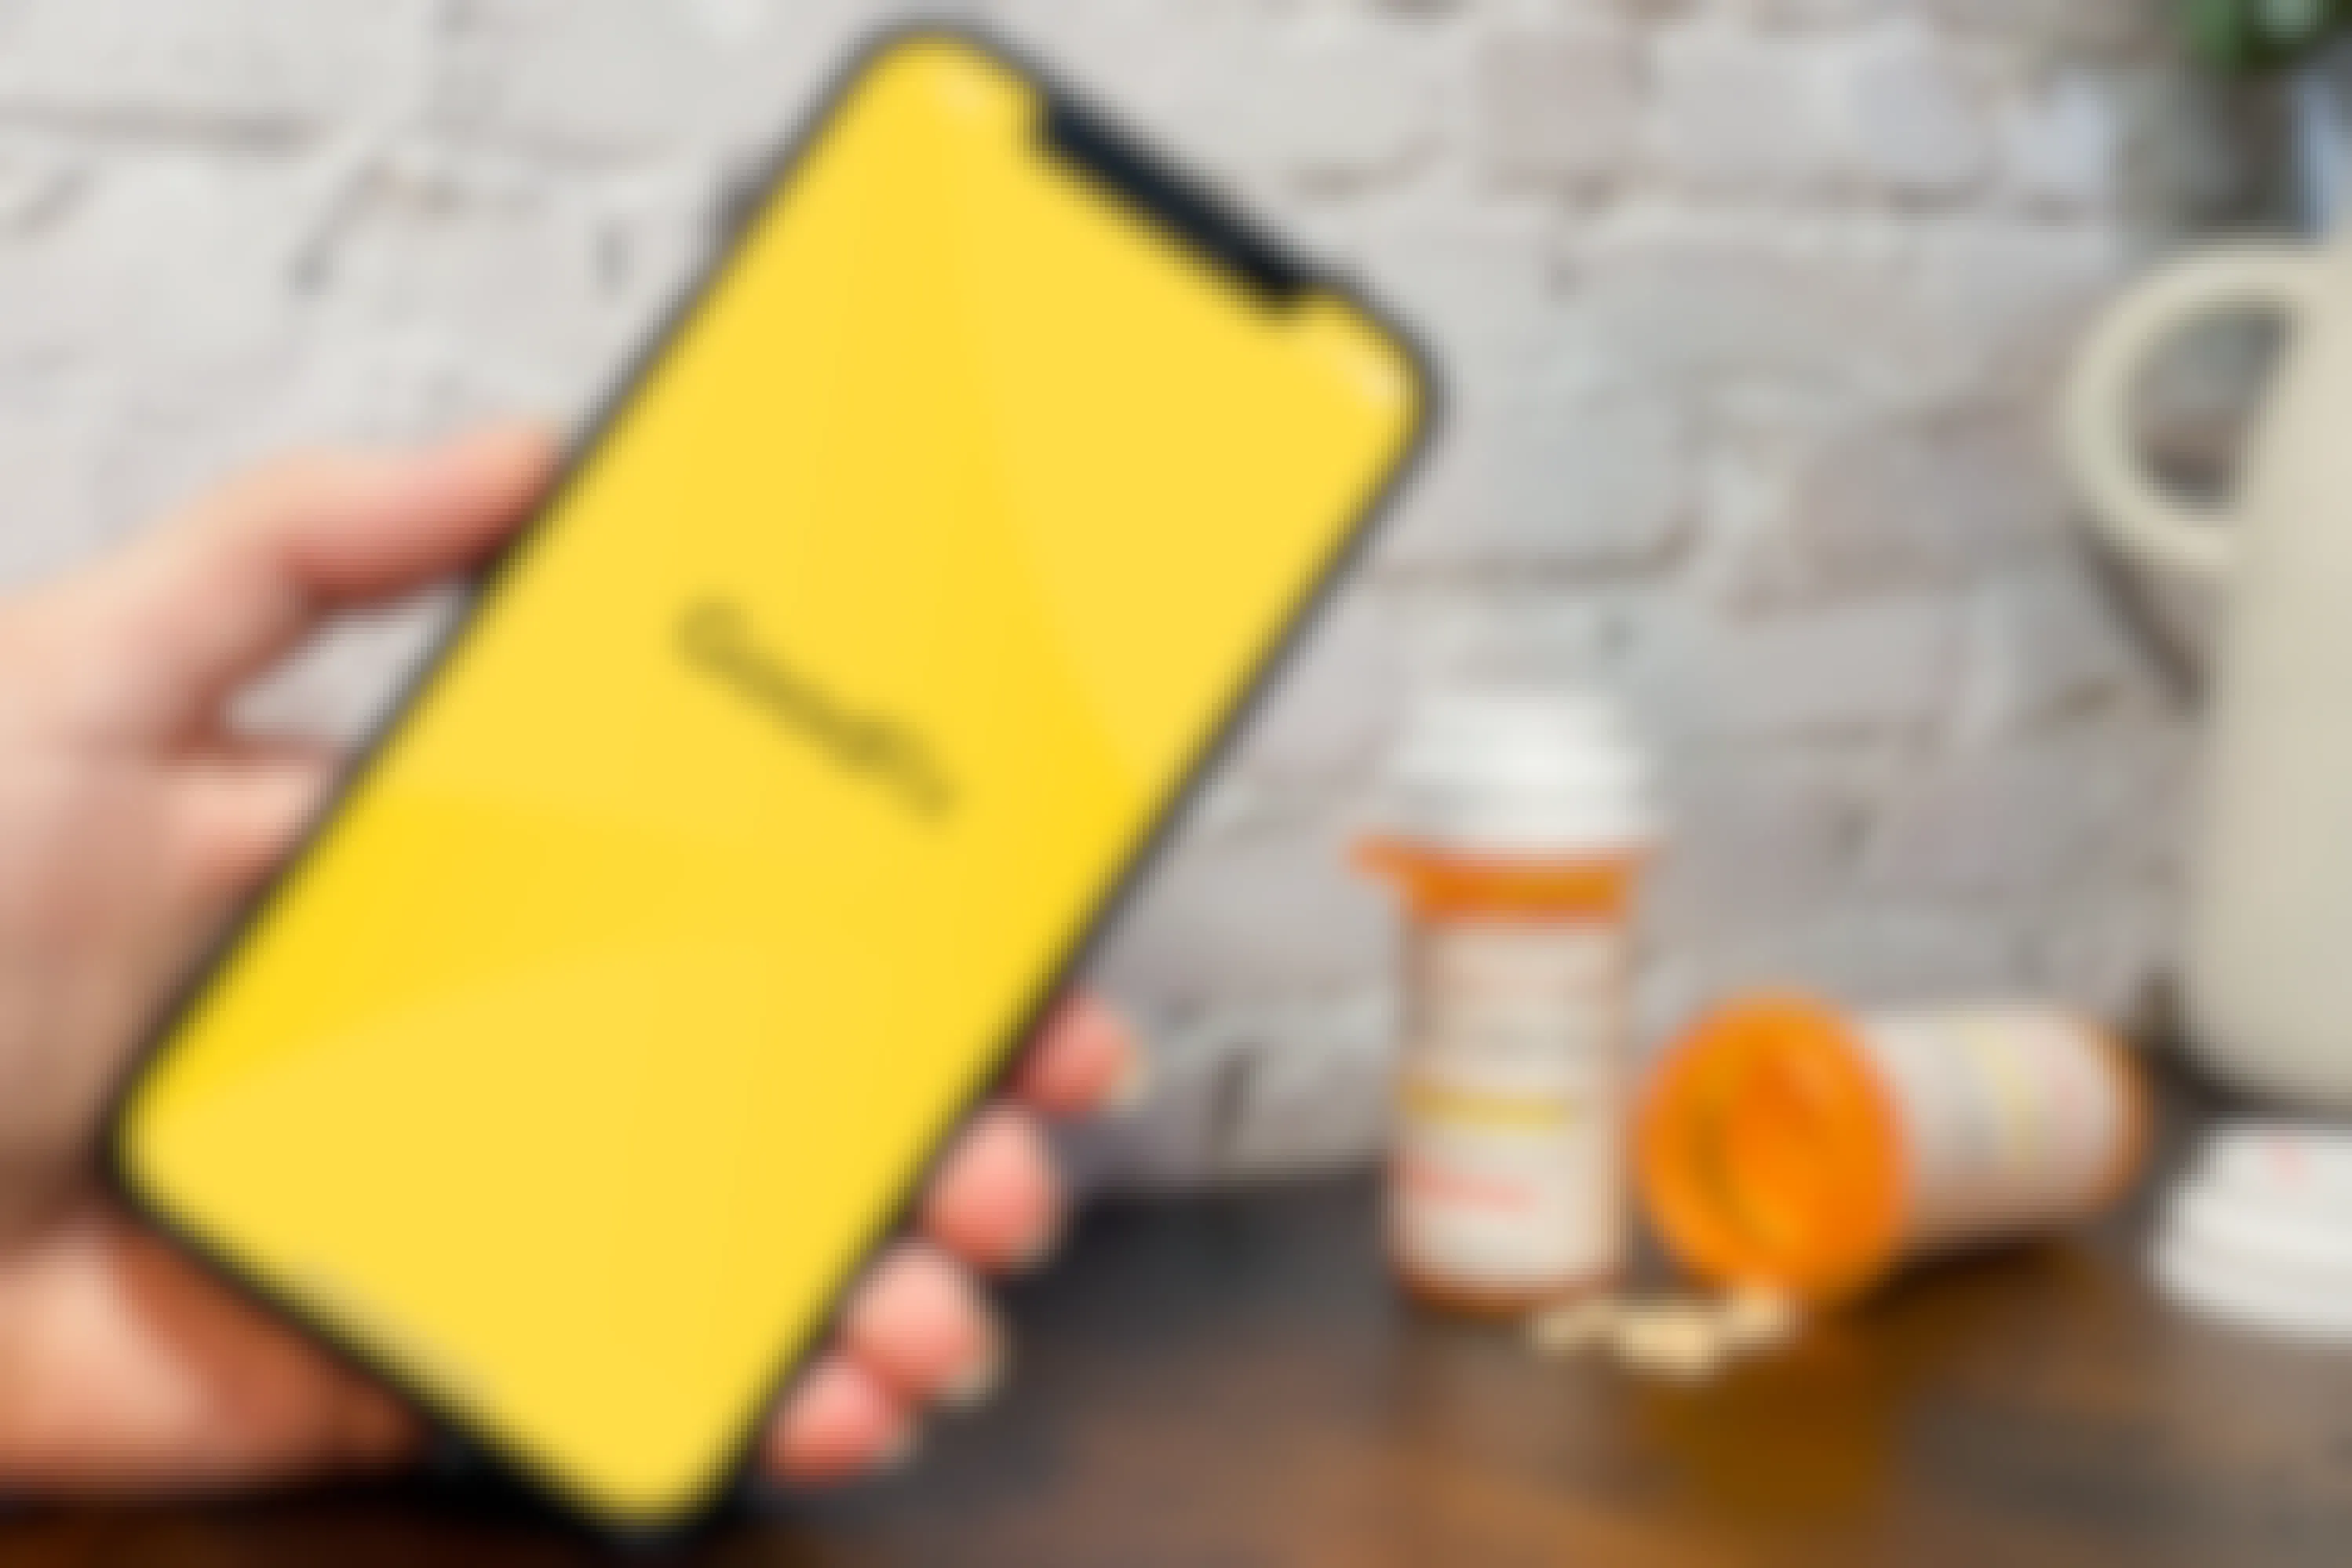 Someone holding up a phone displaying the GoodRX app launch screen with some prescription medication on a table in the background